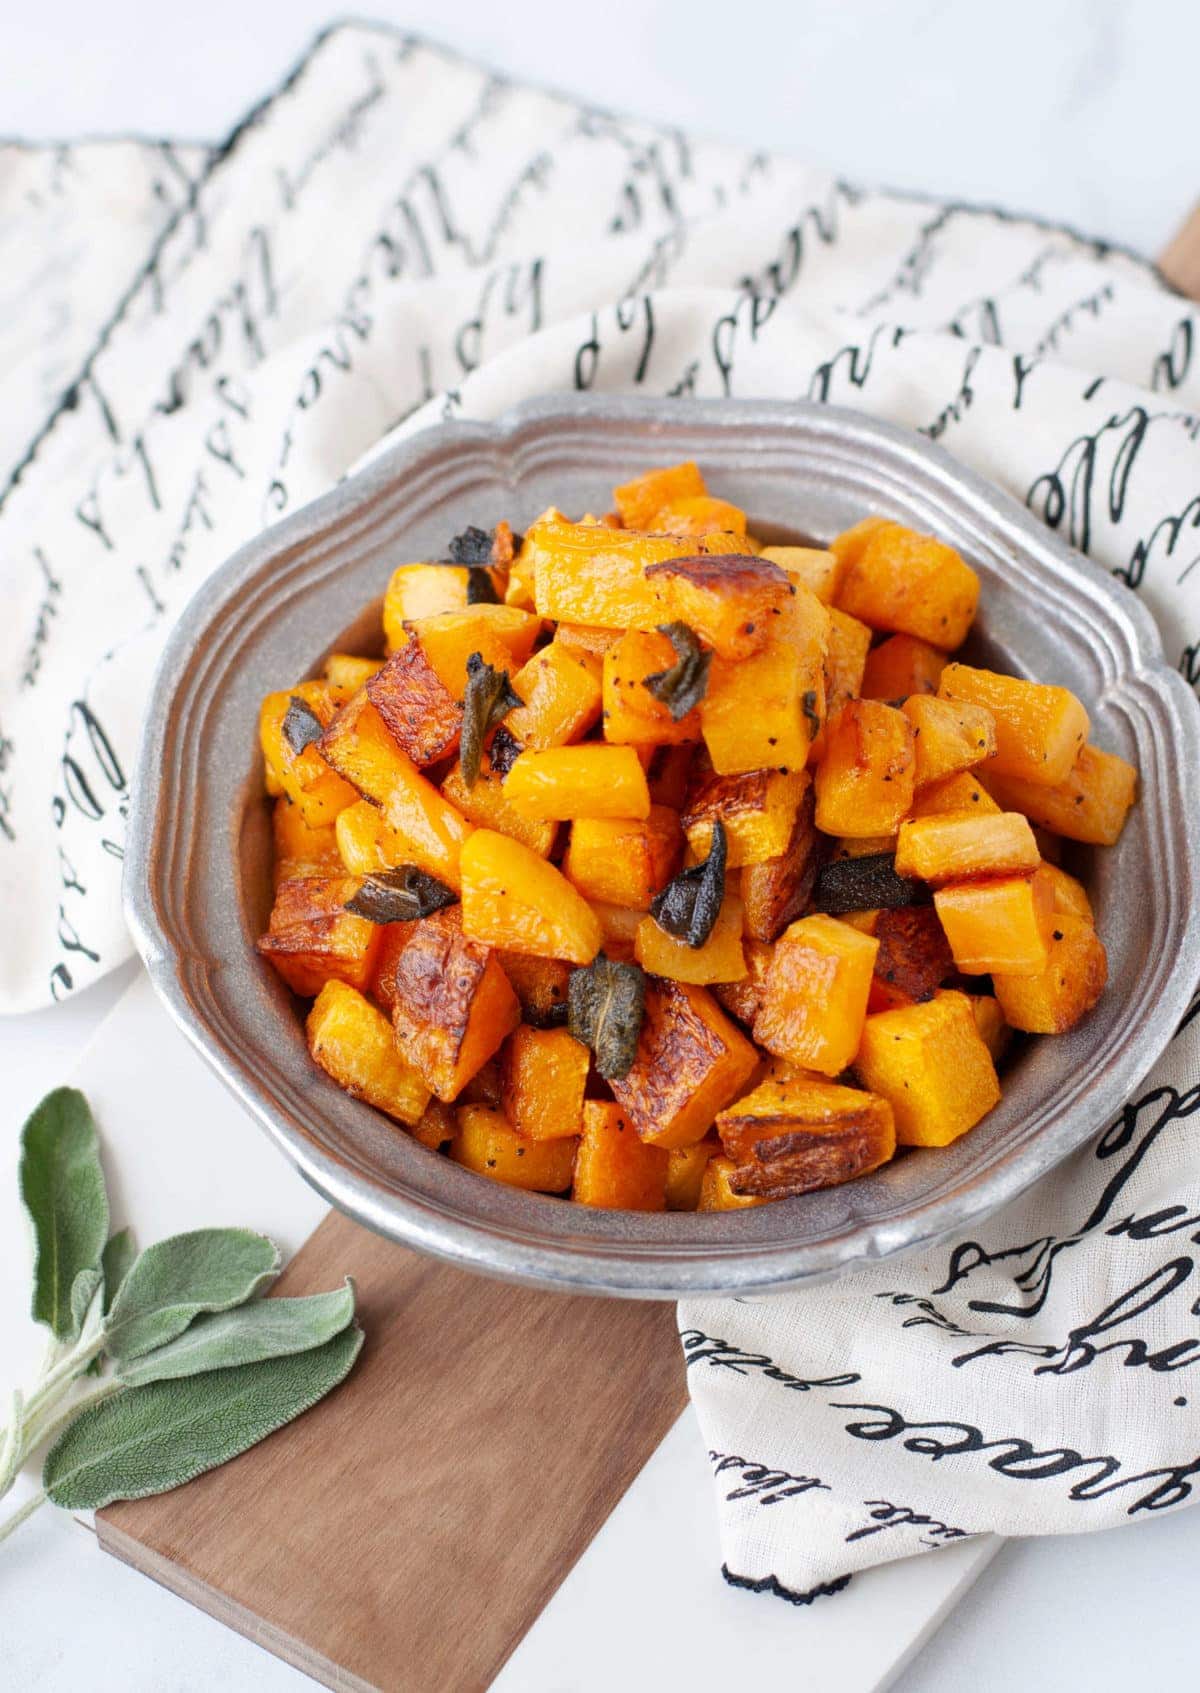 With less than 5 ingredients, this Roasted Butternut Squash with Sage is the perfect quick and easy low carb side dish. Perfect for your keto Thanksgiving table.